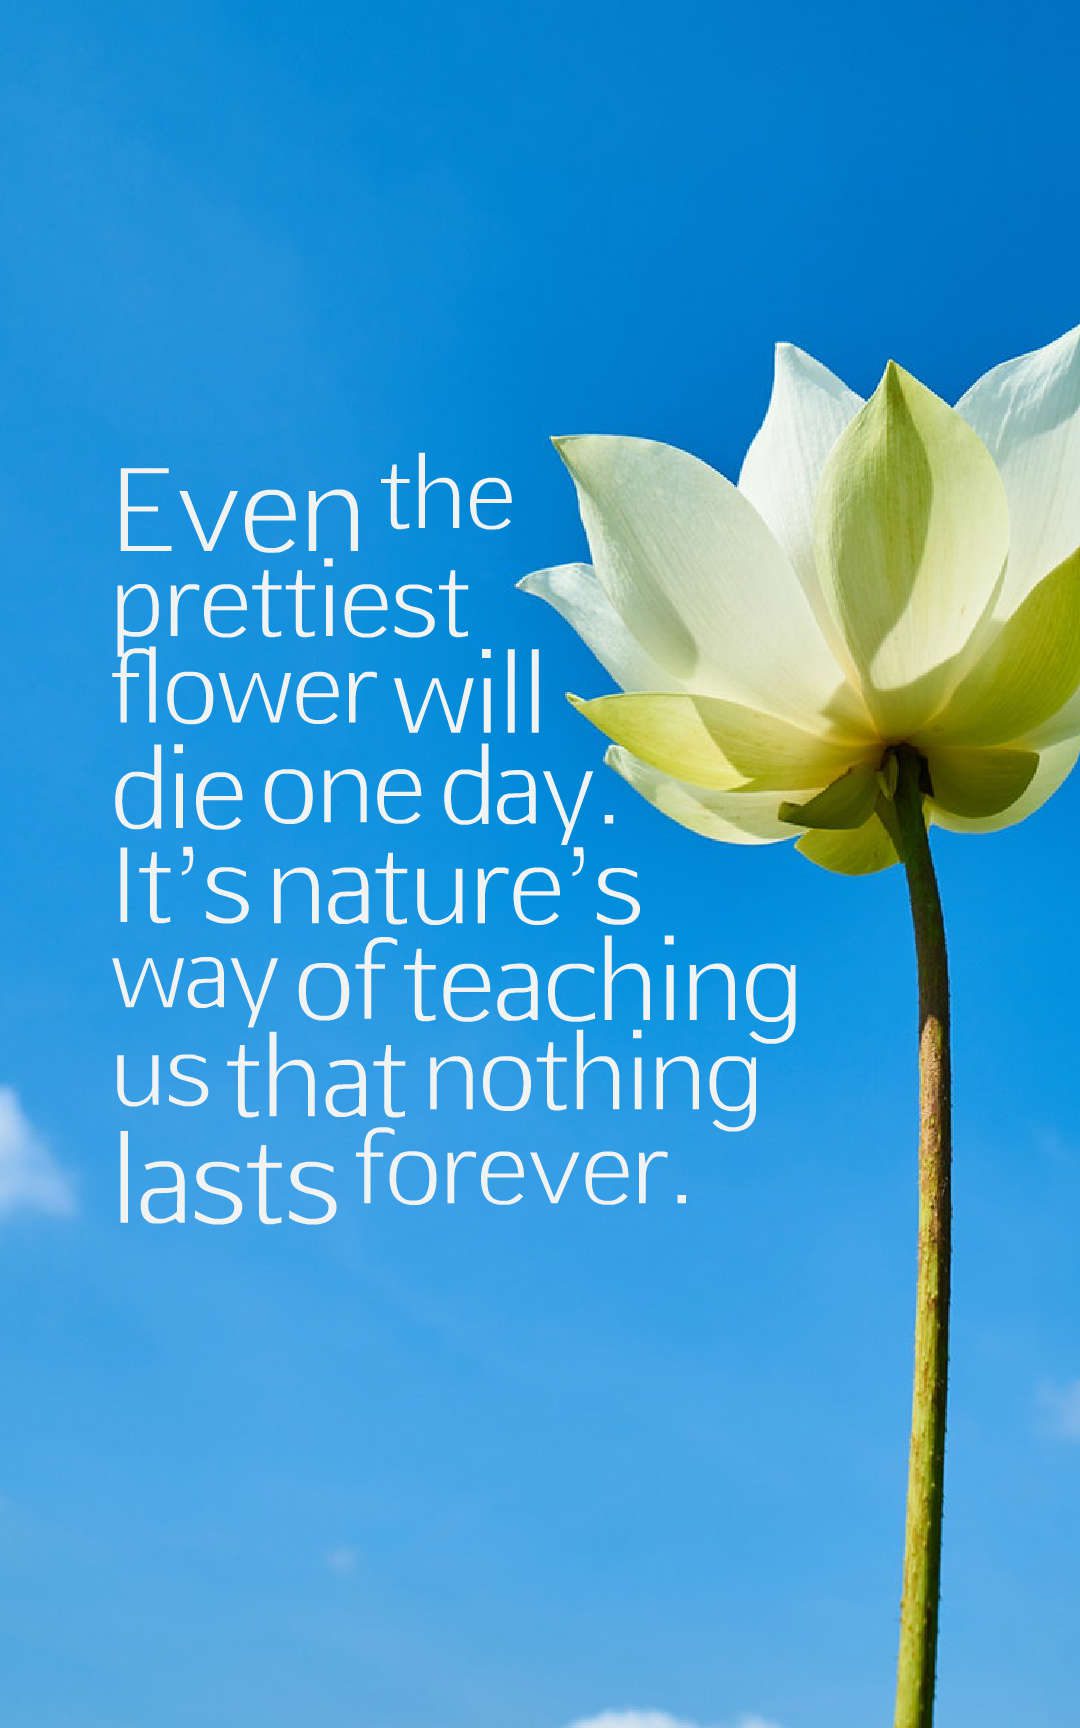 Even the prettiest flower will die one day. It’s nature’s way of teaching us that nothing lasts forever.